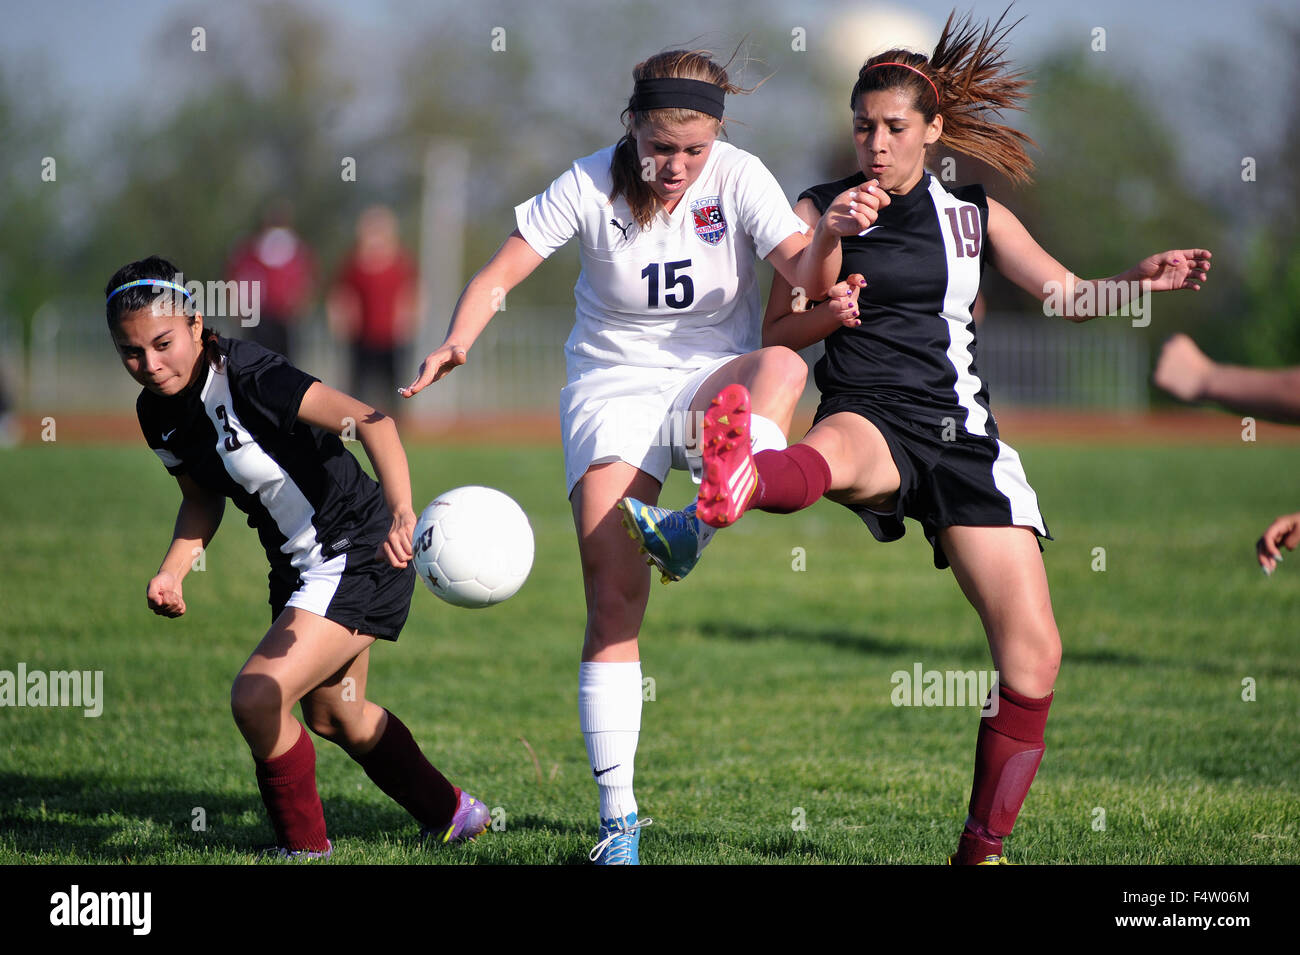 Players make contact with each other as they joust for possession of the ball during a high school soccer (football) match. USA. Stock Photo